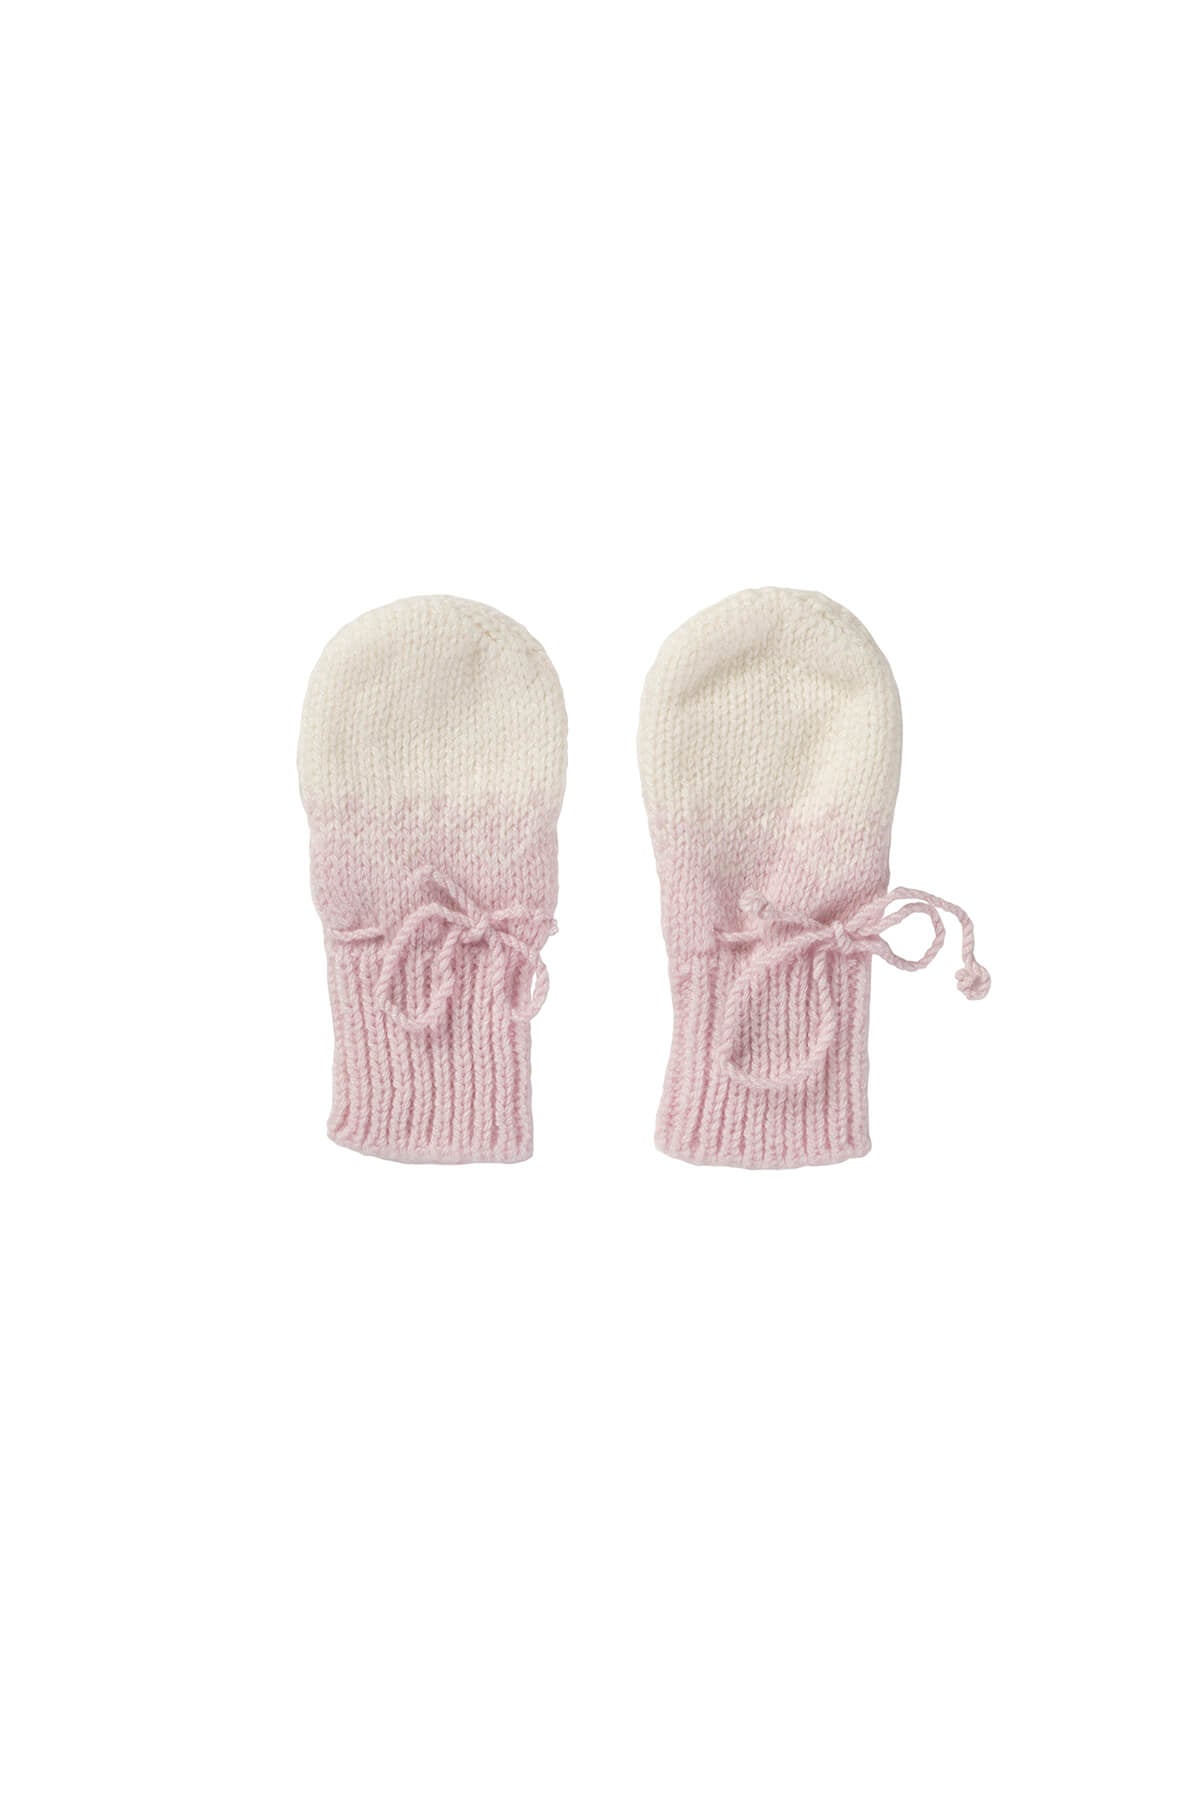 Johnstons of Elgin Hand Knitted Ombre Cashmere Baby Mittens in Blush on a white background 76195SE0208